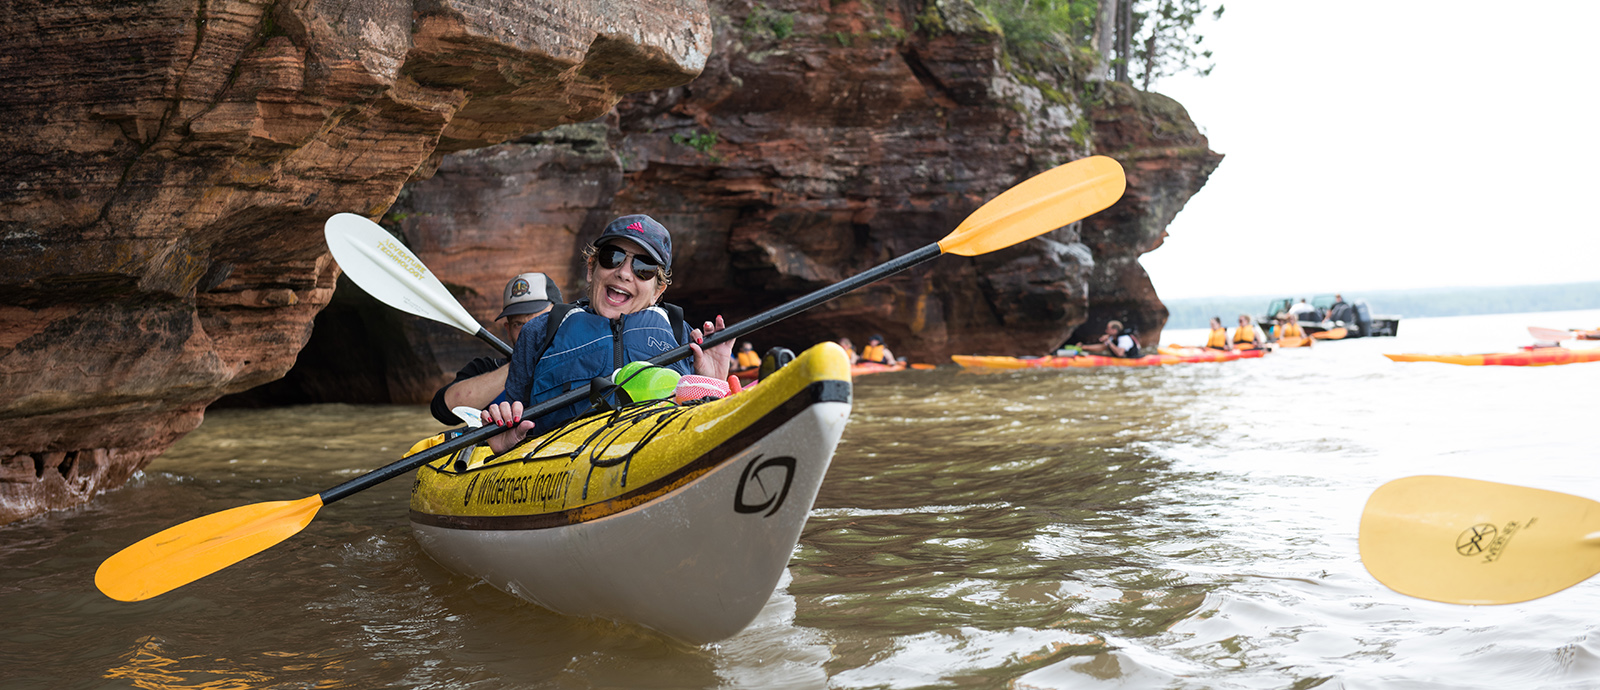 Apostle Islands Paddle, Pinot, and Porter